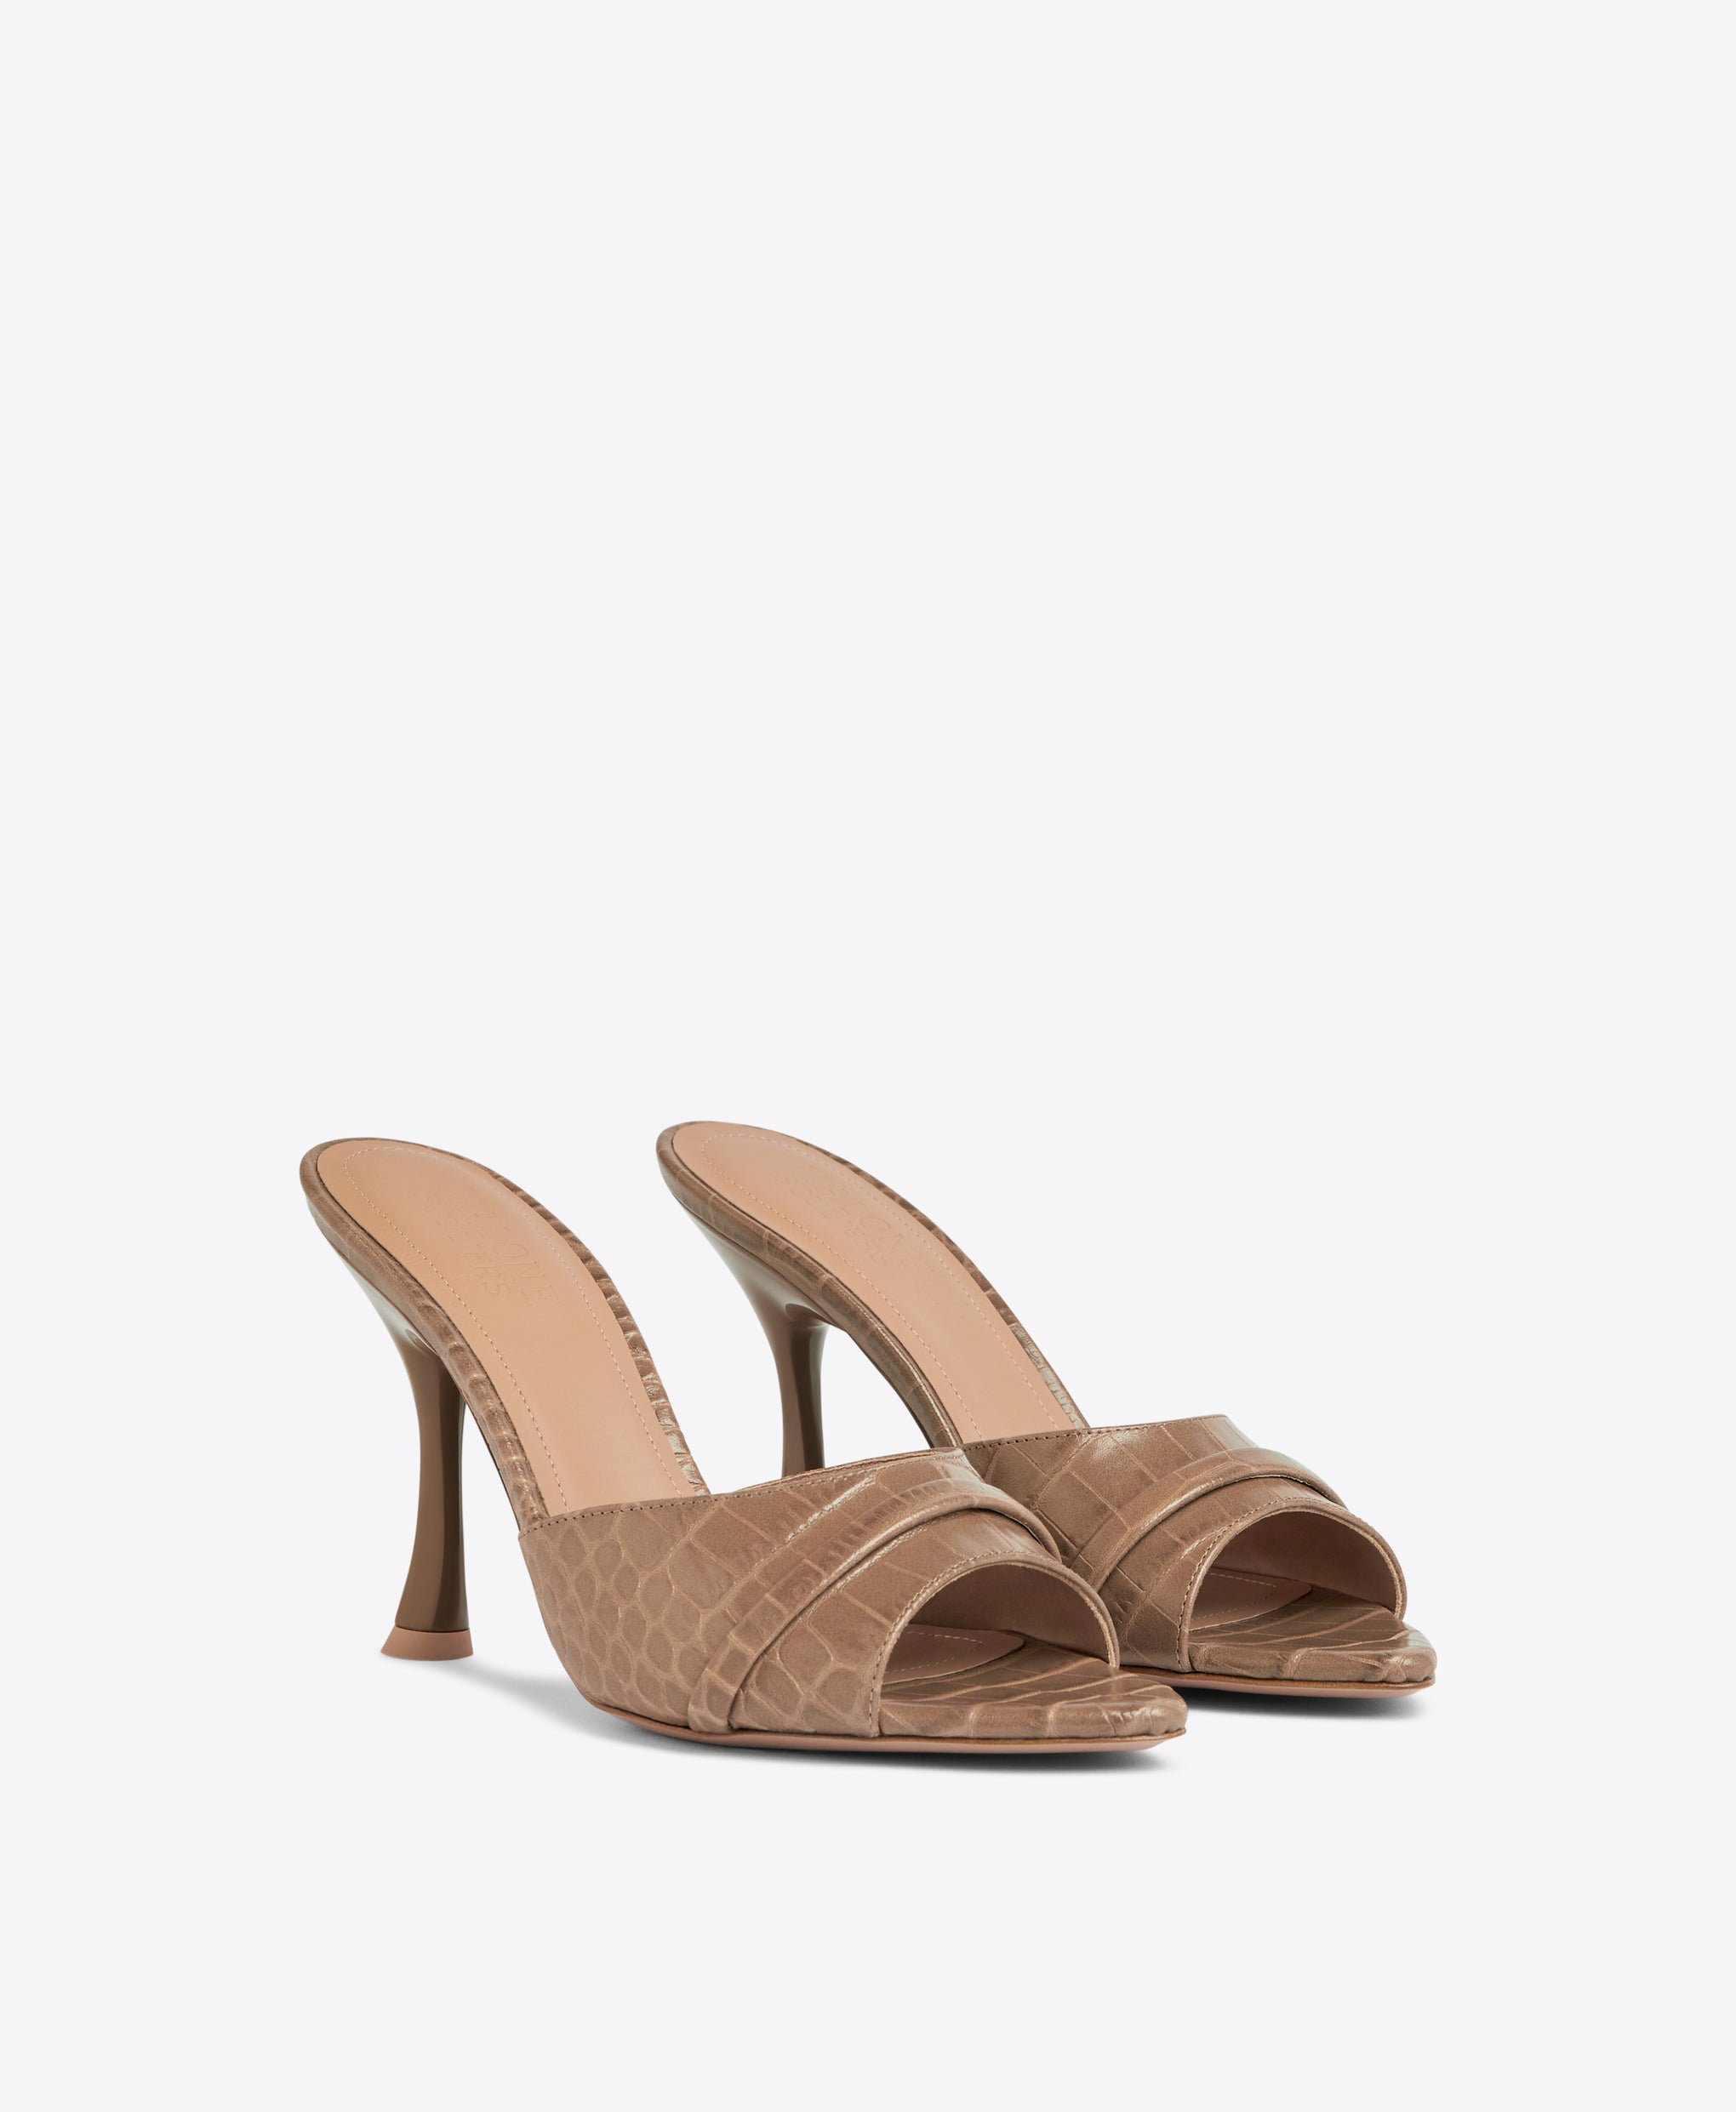 Malone Souliers Julia 90 Taupe Embossed Leather Sandals